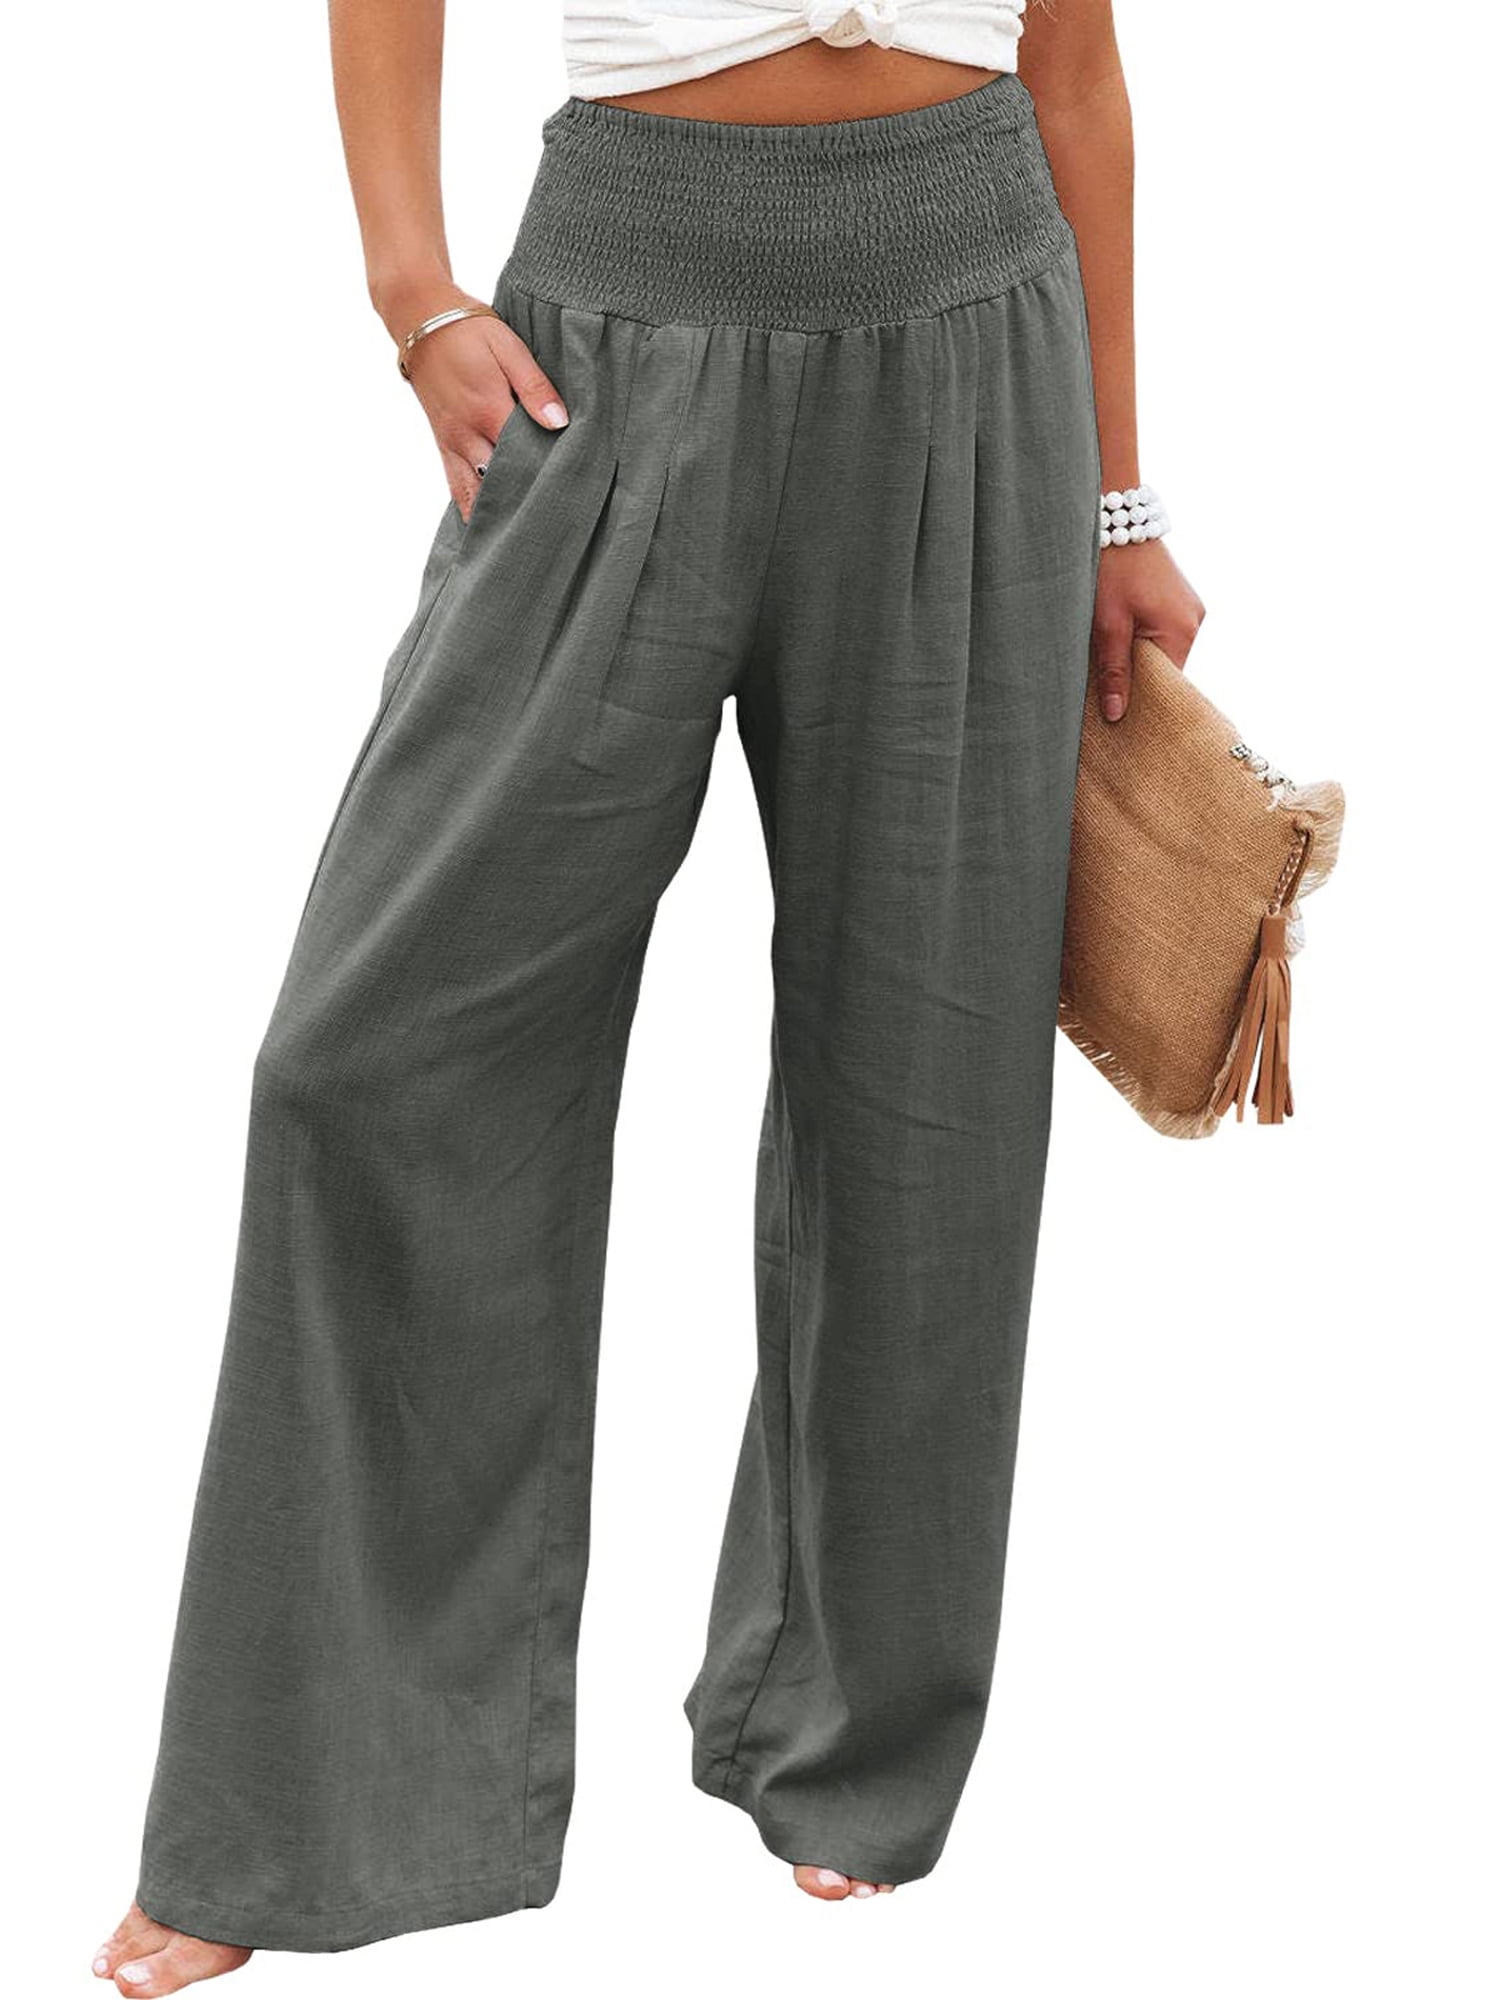 Washed Linen Trousers, Linen Loose Trousers, Linen Pants With Pockets, Womens  Pants, Natural Linen Pants With Belt, Pants Low Wais 